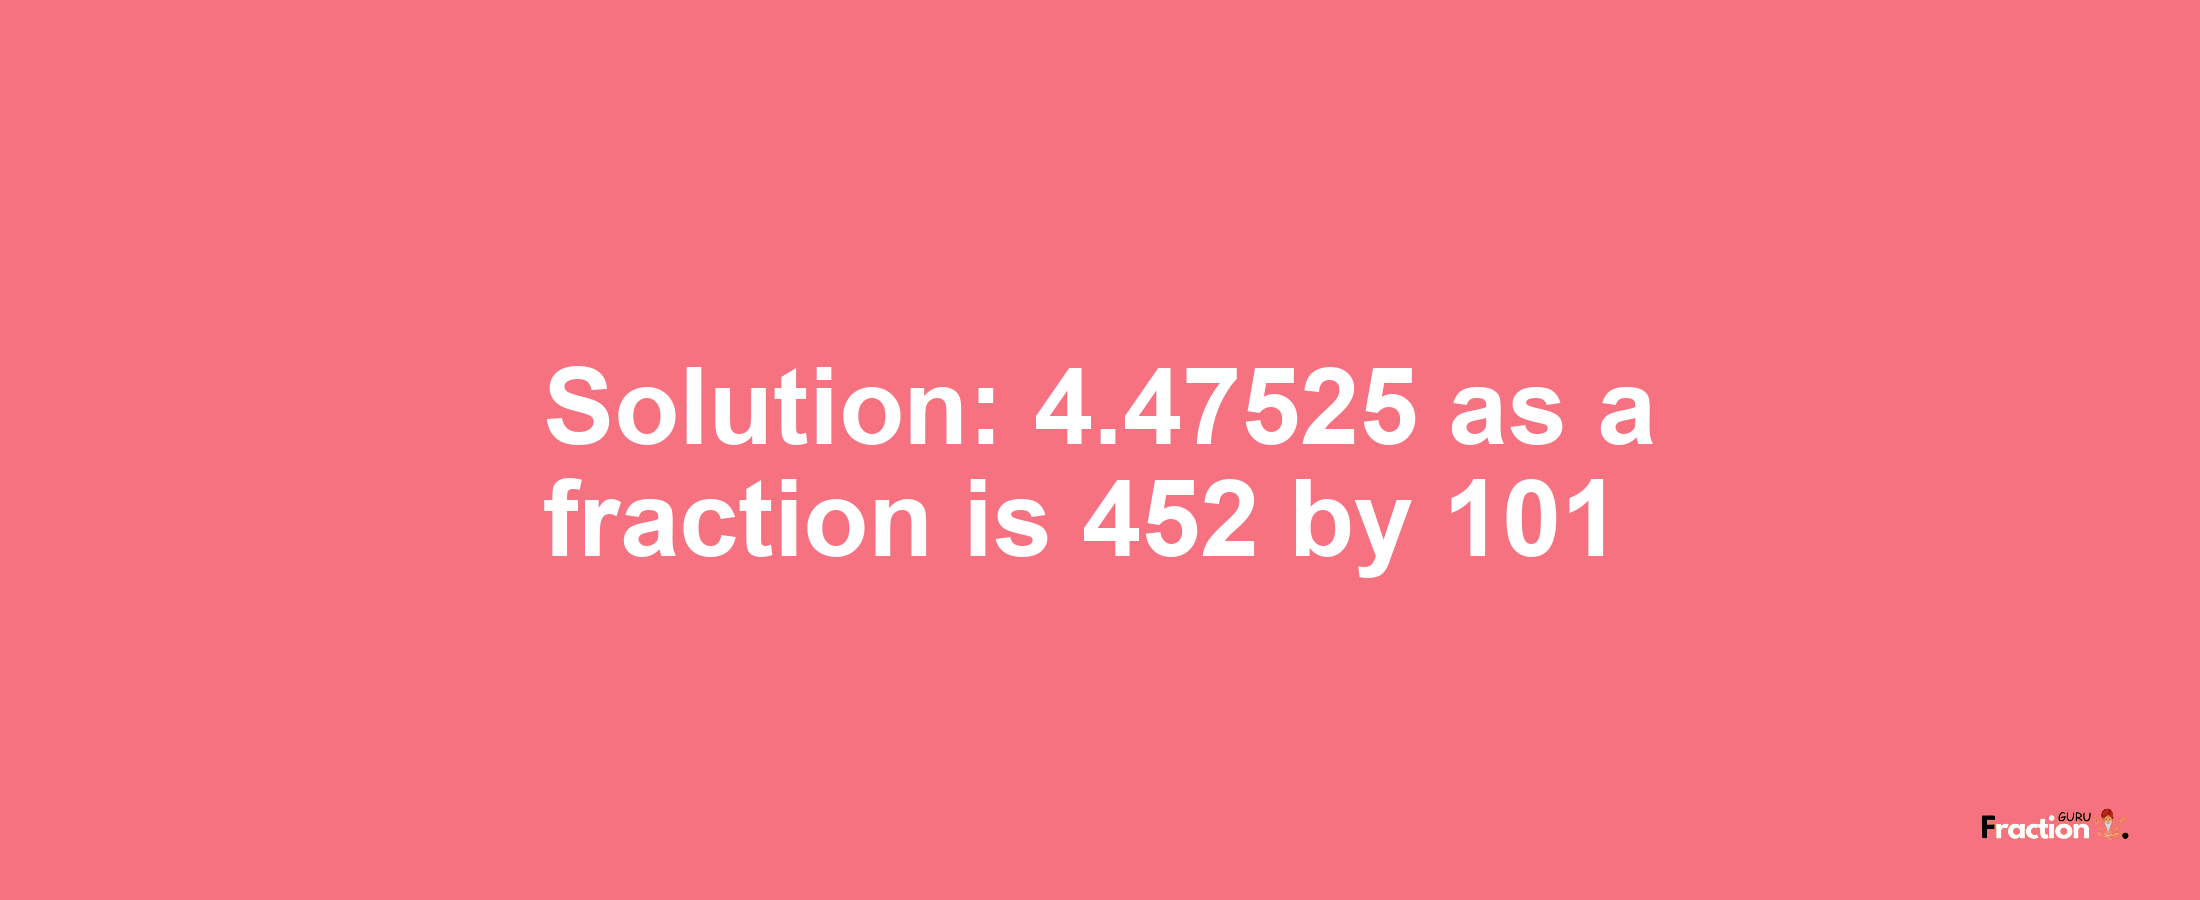 Solution:4.47525 as a fraction is 452/101